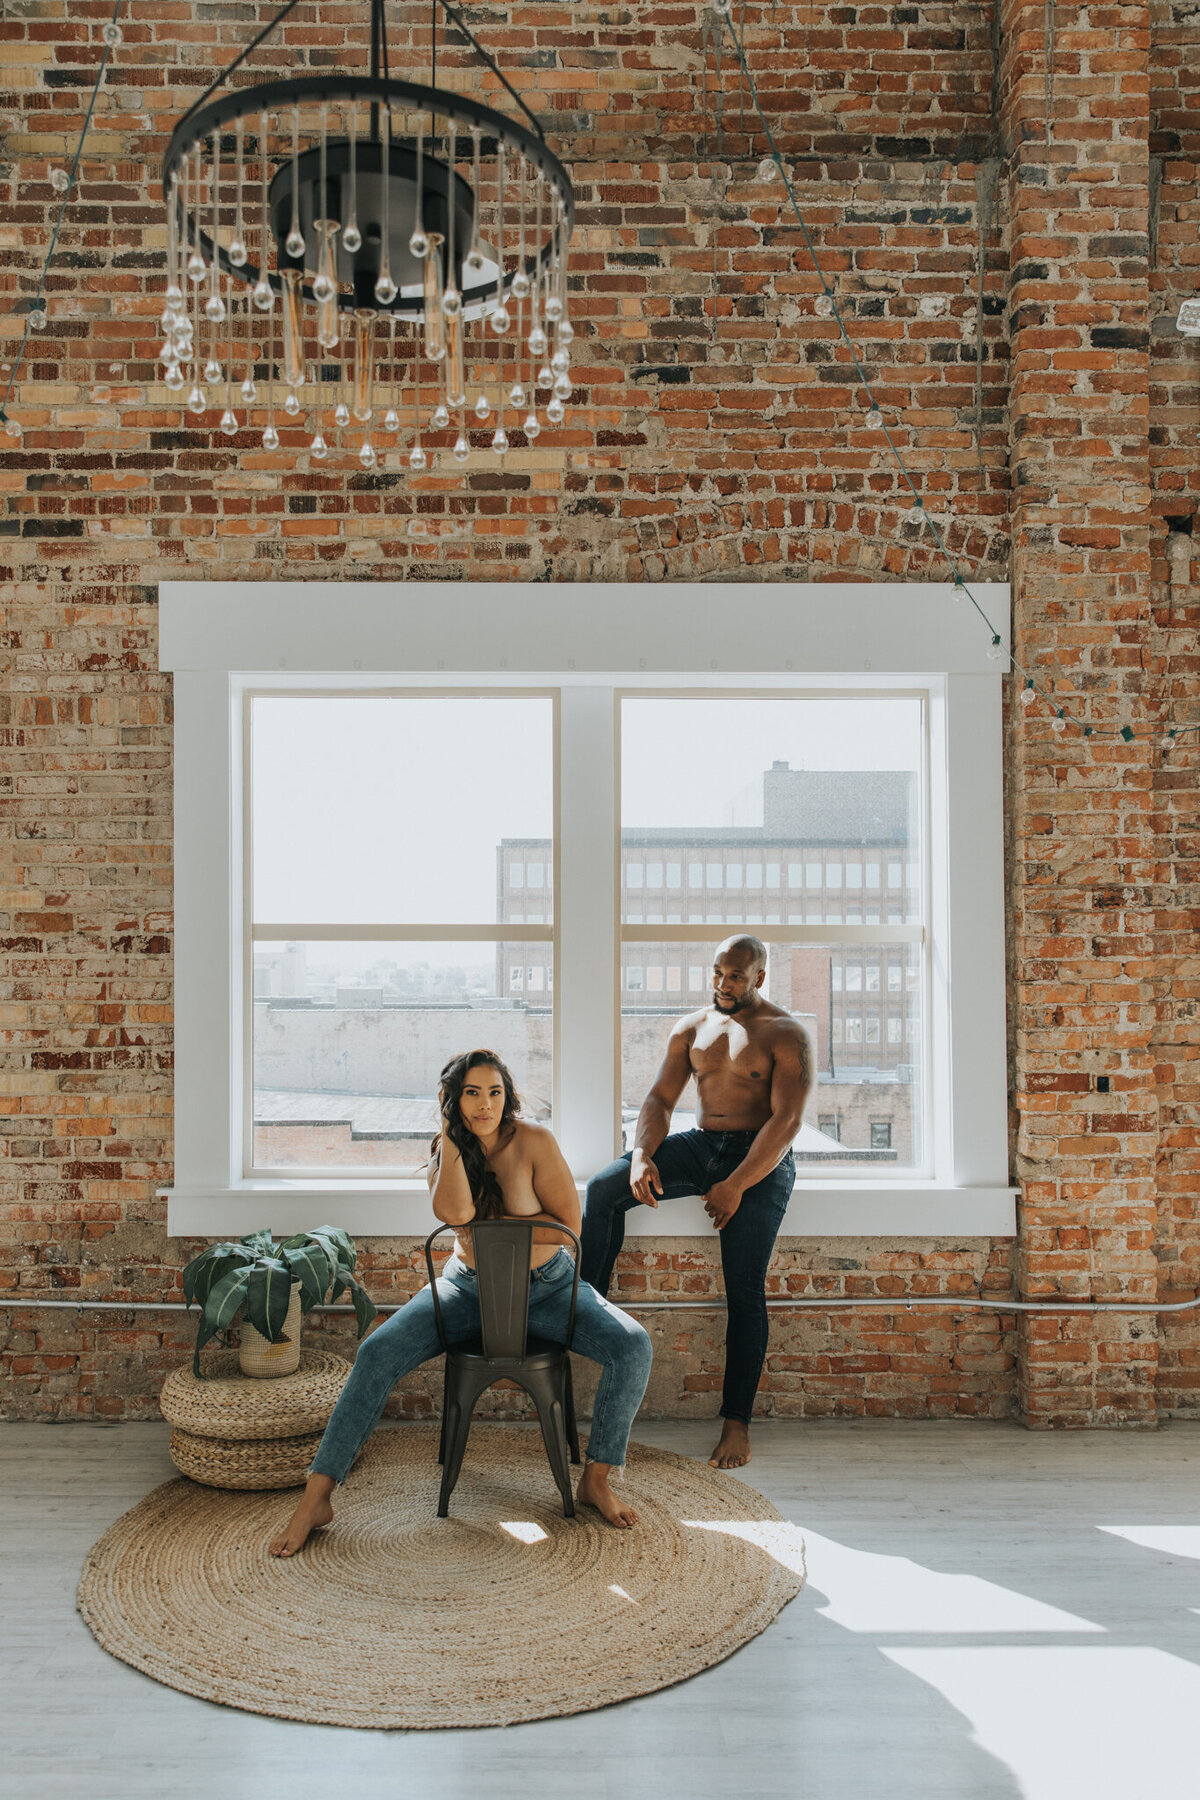 This couple is posed looking at the camera. They are both topless and are wearing jeans.